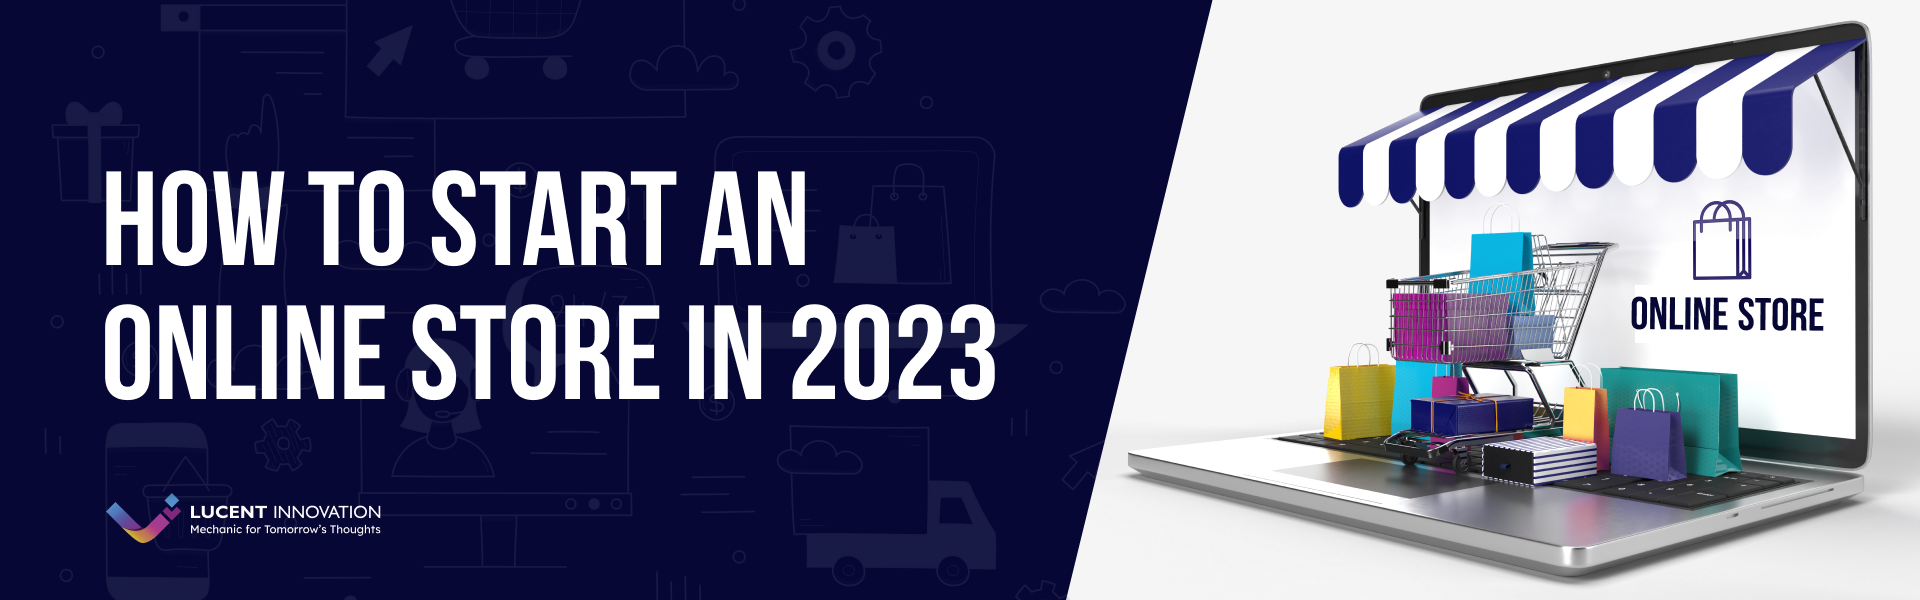 How to start an online store in 2023